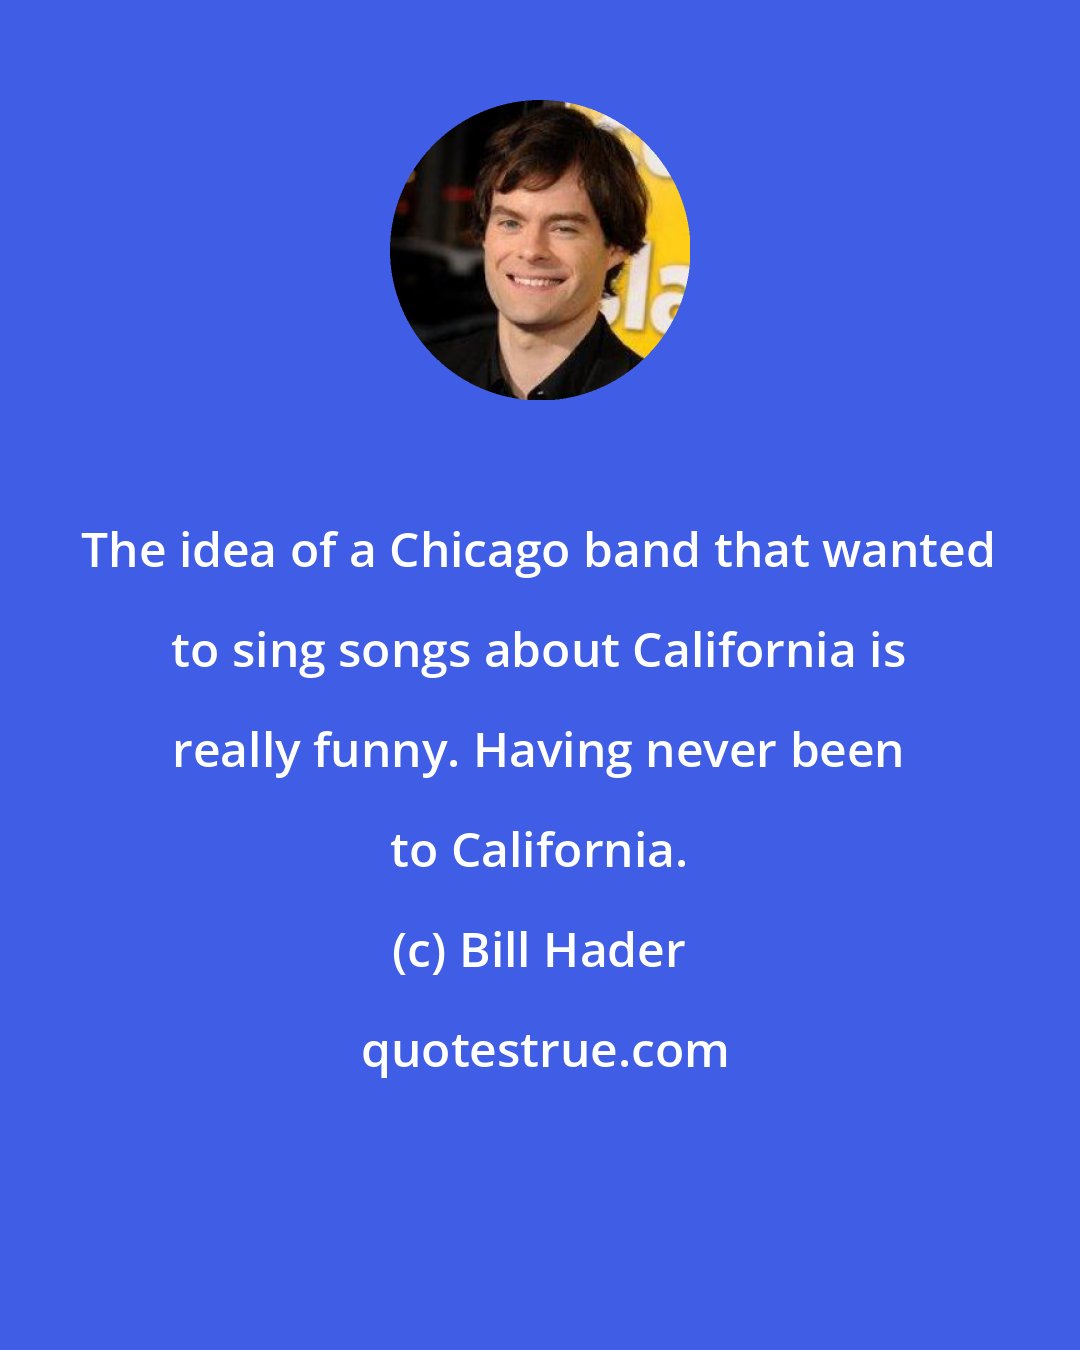 Bill Hader: The idea of a Chicago band that wanted to sing songs about California is really funny. Having never been to California.